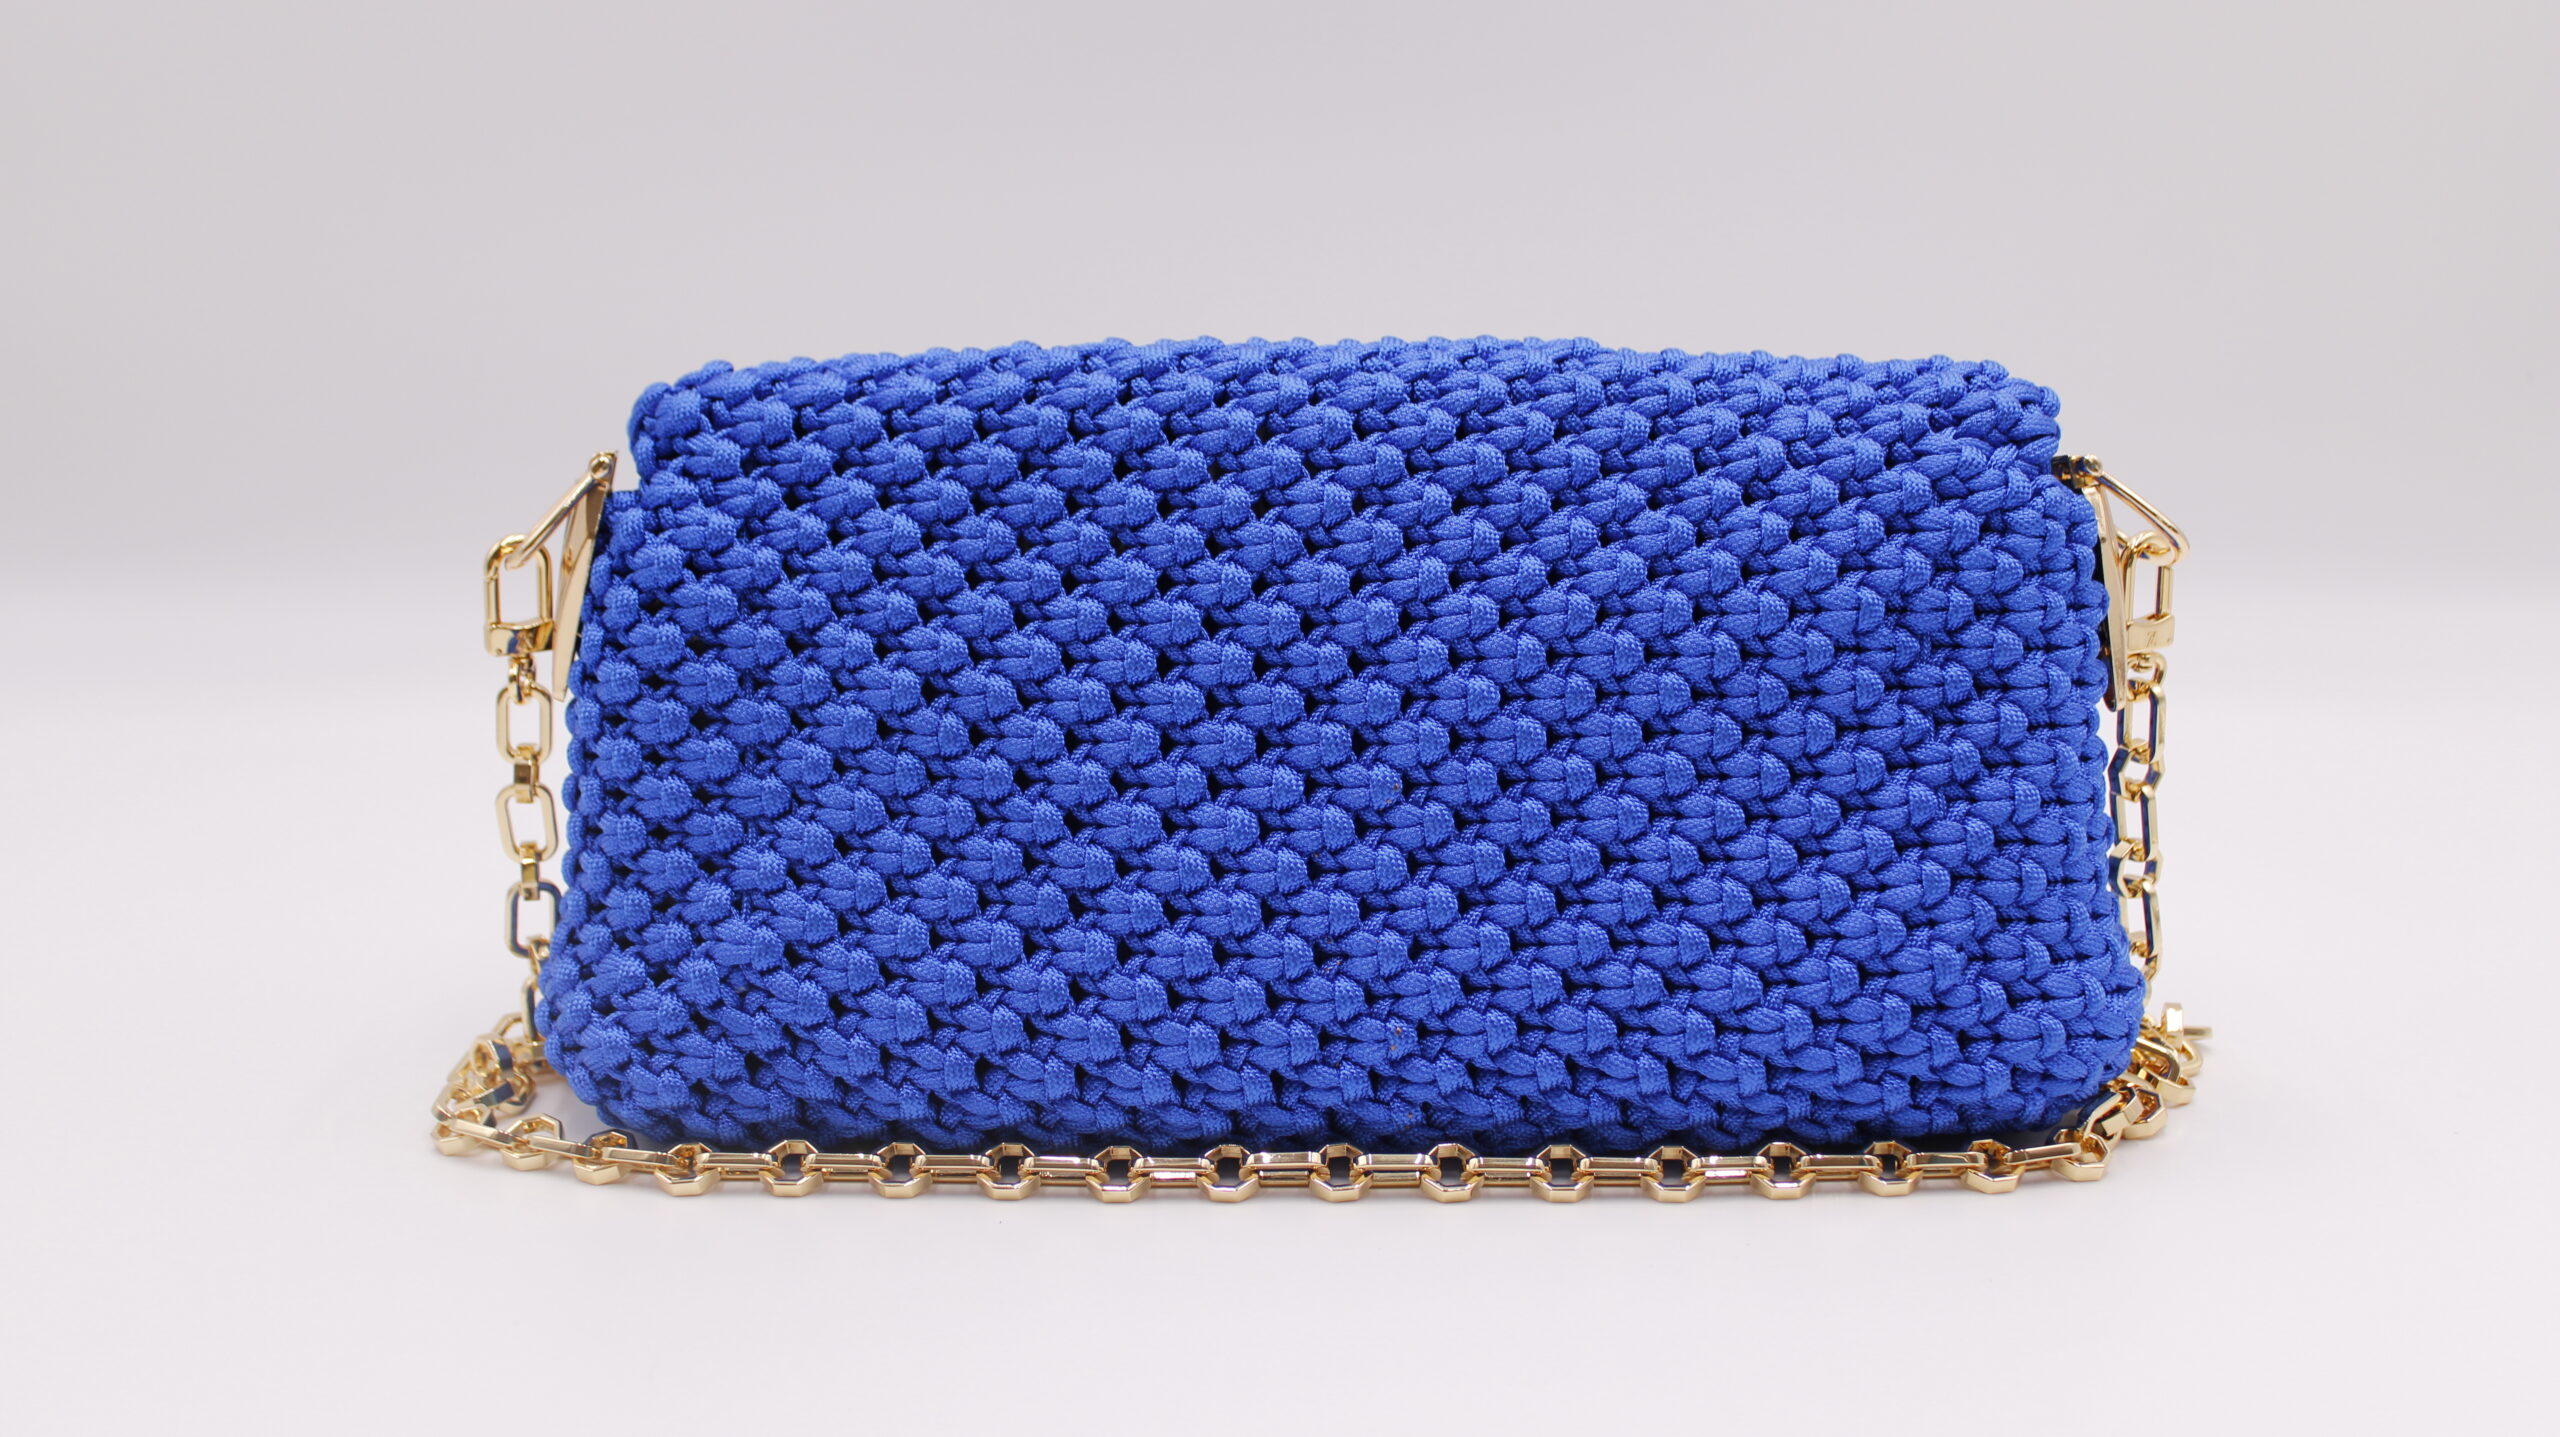 Buy Royal Blue Clutch, Royal Blue and Silver Lace Clutch, Evening Clutch,  Wedding Clutch Purse, Lace Clutch, Bridesmaid Clutch Purse Online in India  - Etsy